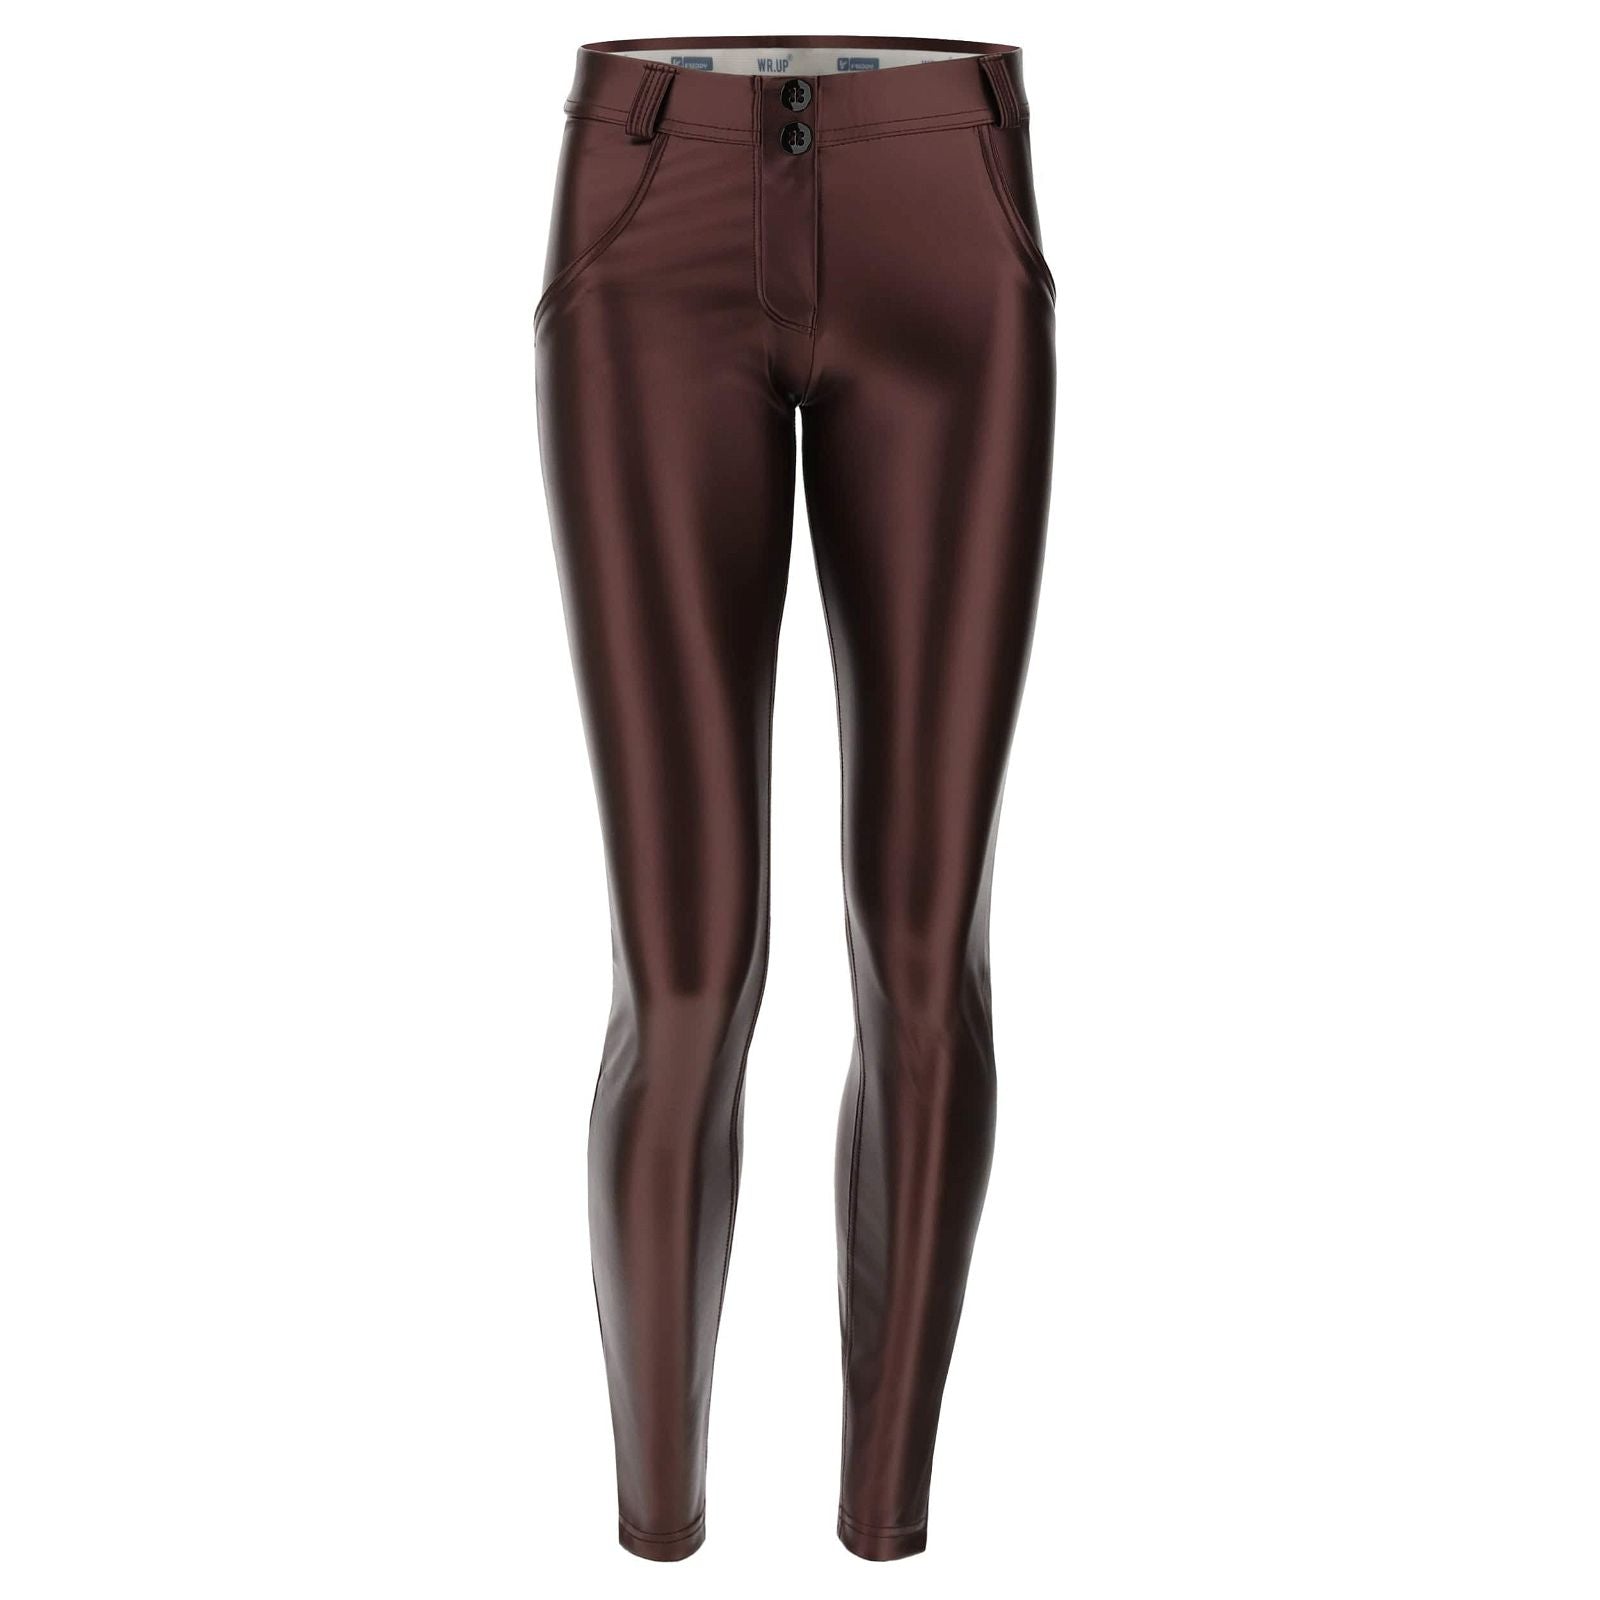 WR.UP® Metallic Faux Leather - Mid Rise - Full Length - Aubergine 2